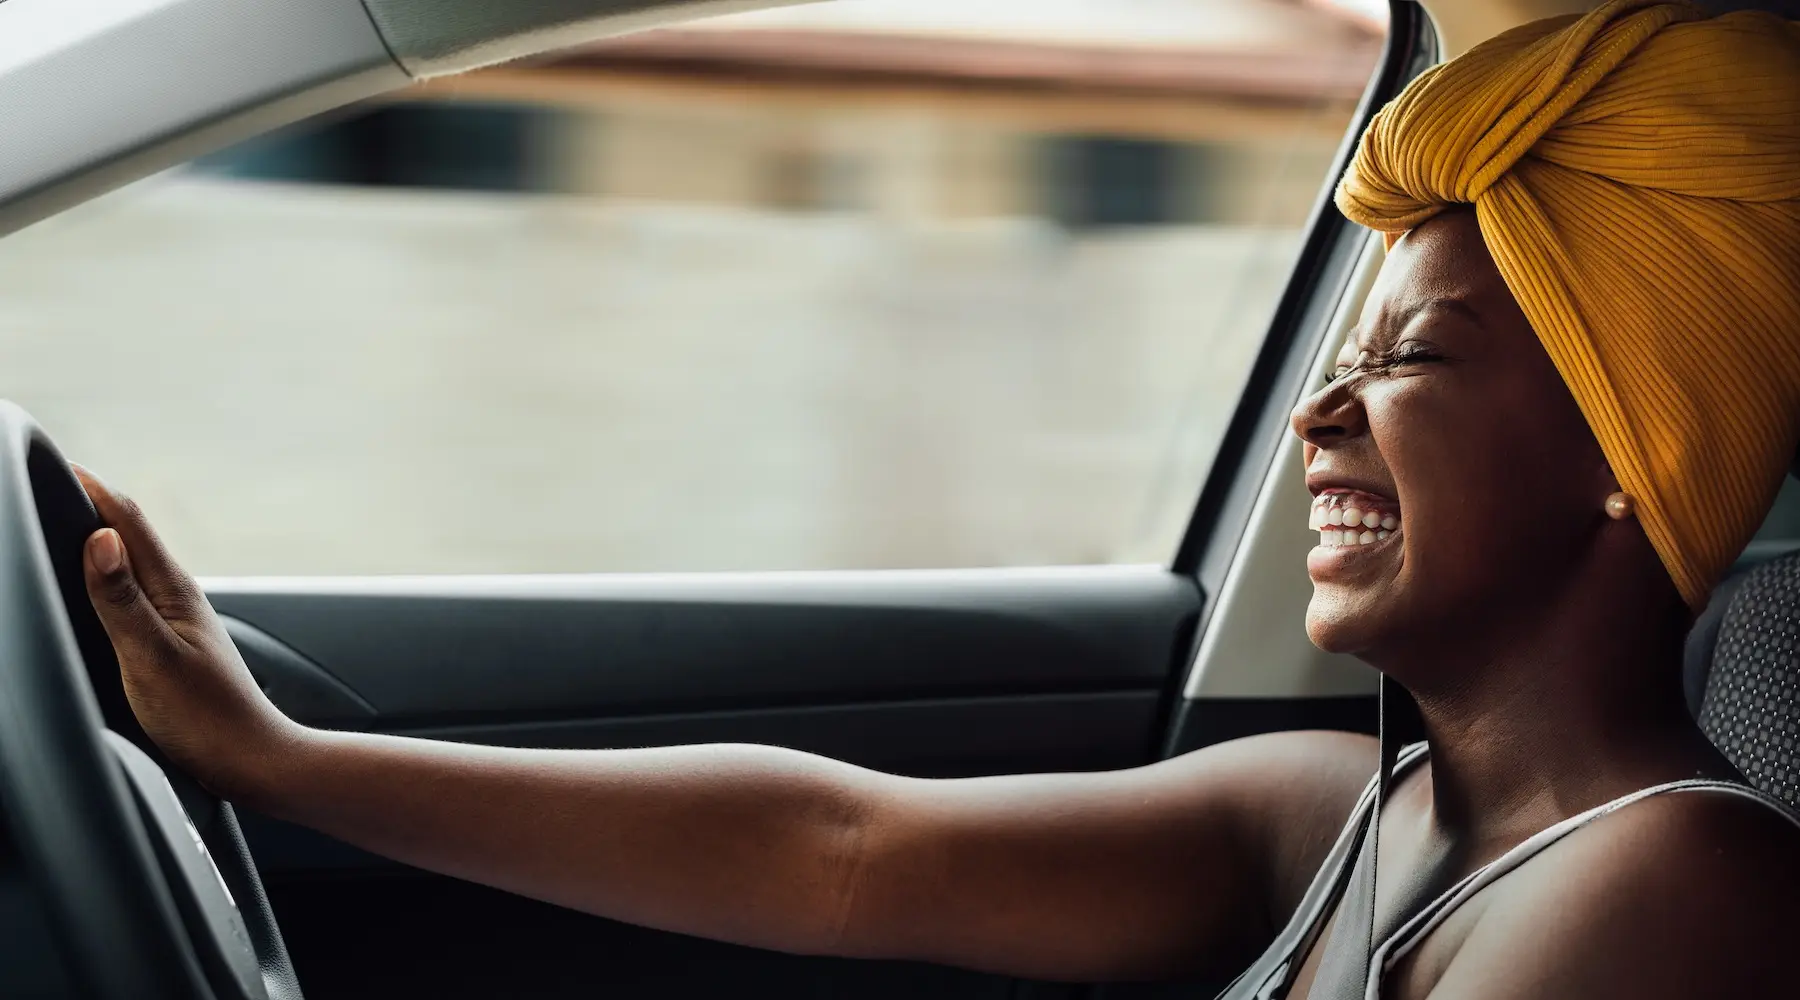 A woman with brown skin smiling as she drives a car